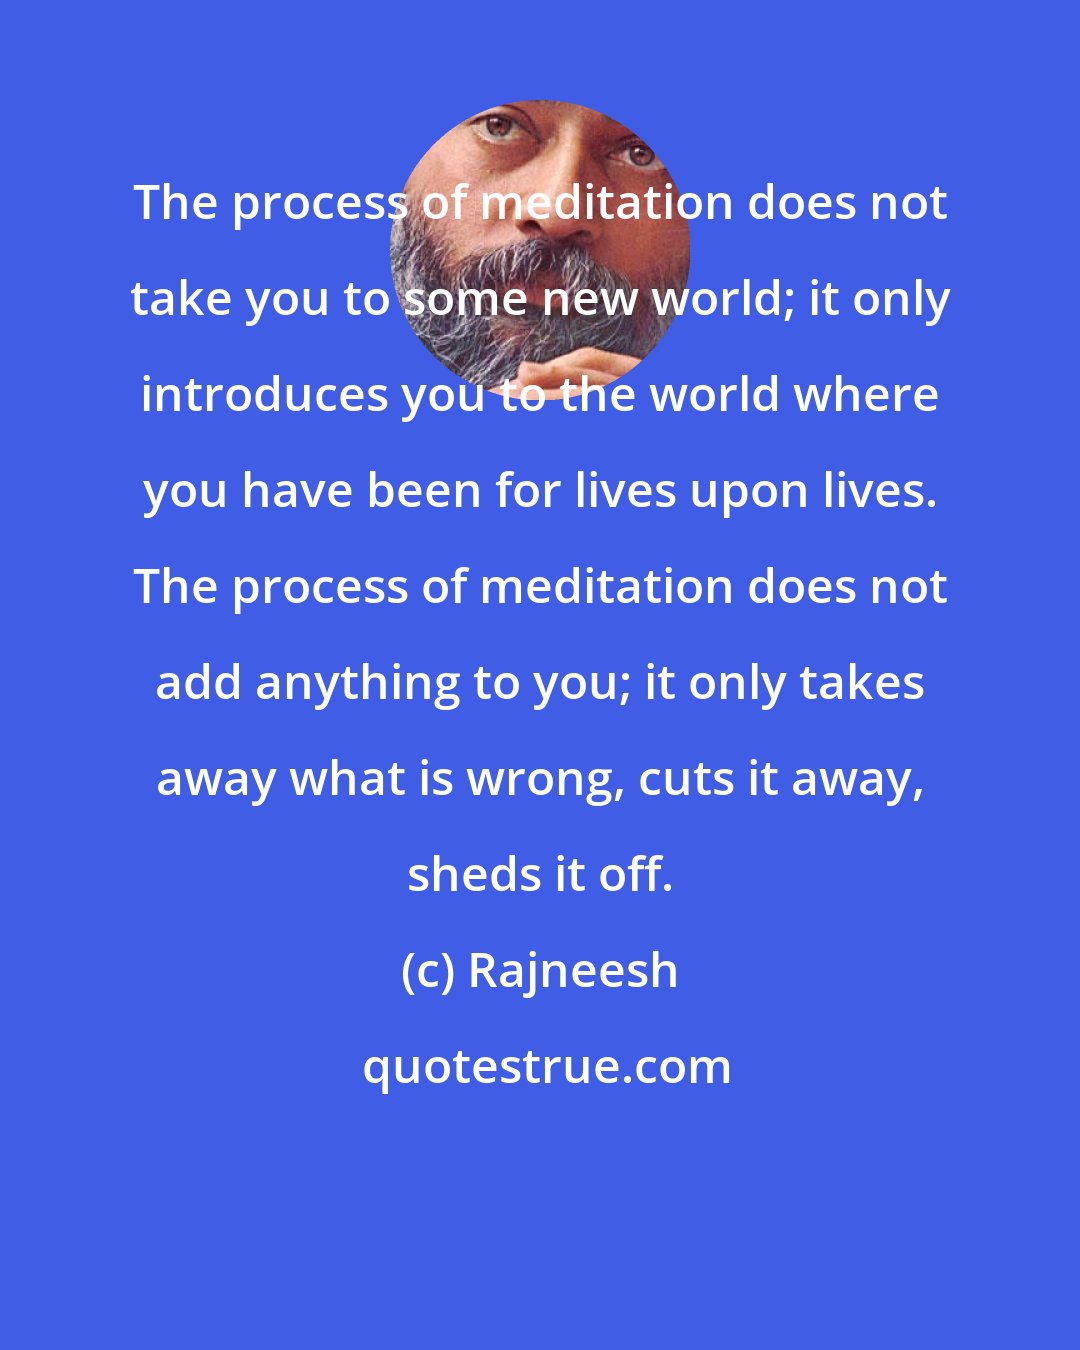 Rajneesh: The process of meditation does not take you to some new world; it only introduces you to the world where you have been for lives upon lives. The process of meditation does not add anything to you; it only takes away what is wrong, cuts it away, sheds it off.